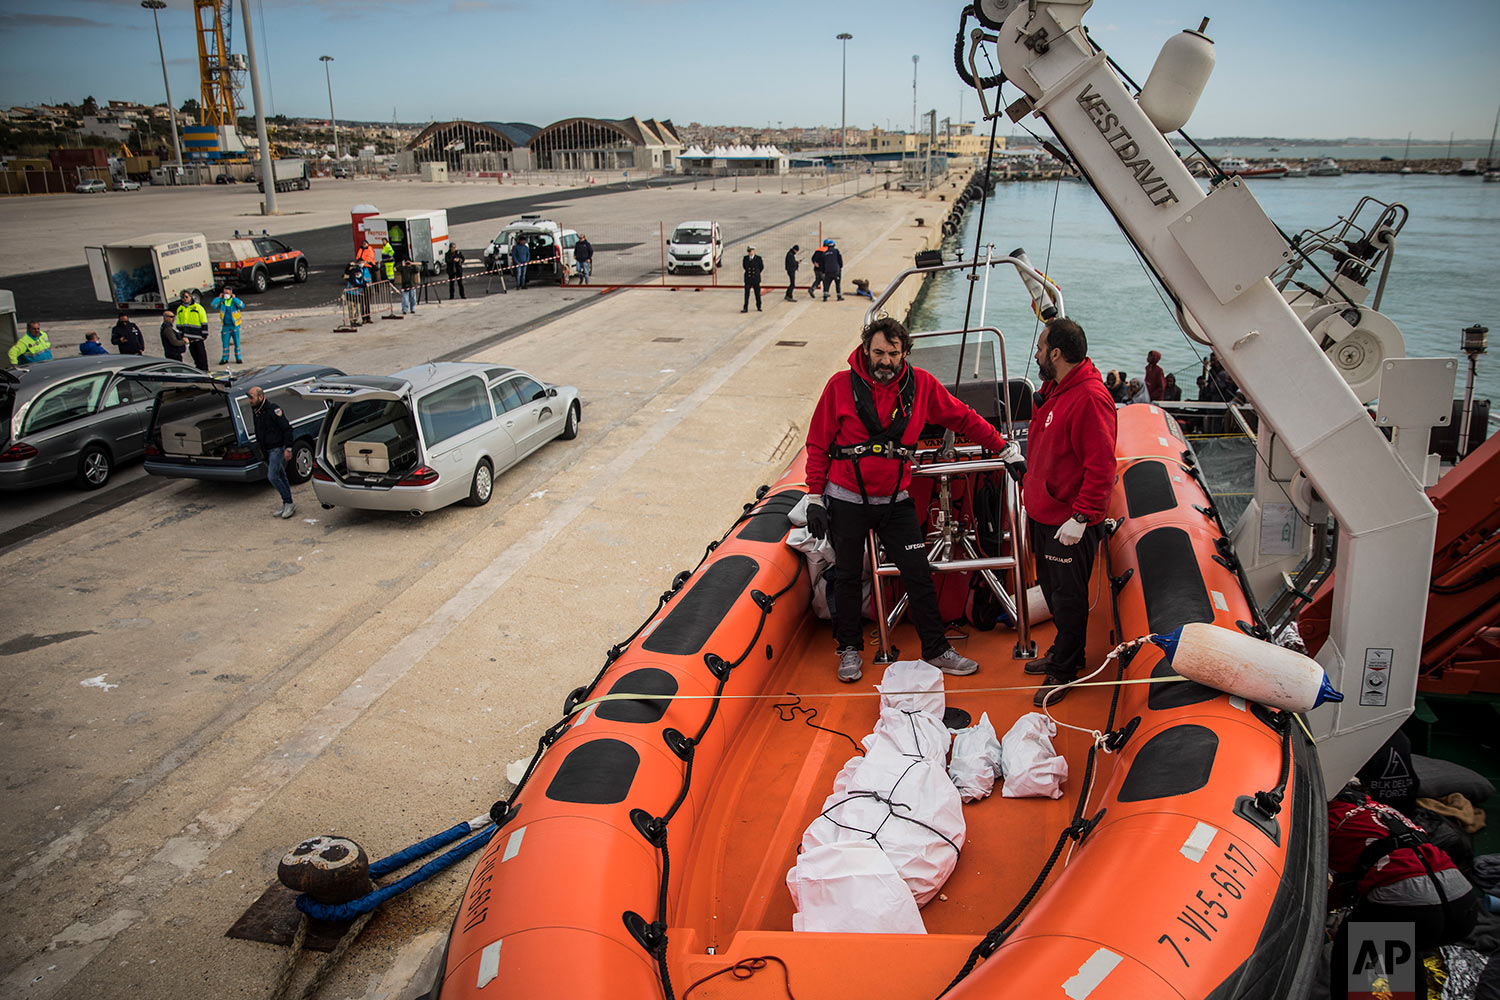  In this Friday, Jan. 19, 2018 photo aid workers from the Spanish NGO Proactiva Open Arms wait to disembark the lifeless bodies of an Eritrean man and 2 babies from the organization's rescue vessel, at the port of Pozzallo, in Sicily, Italy. (AP Photo/Santi Palacios)&nbsp; |&nbsp; See these photos on AP Images  